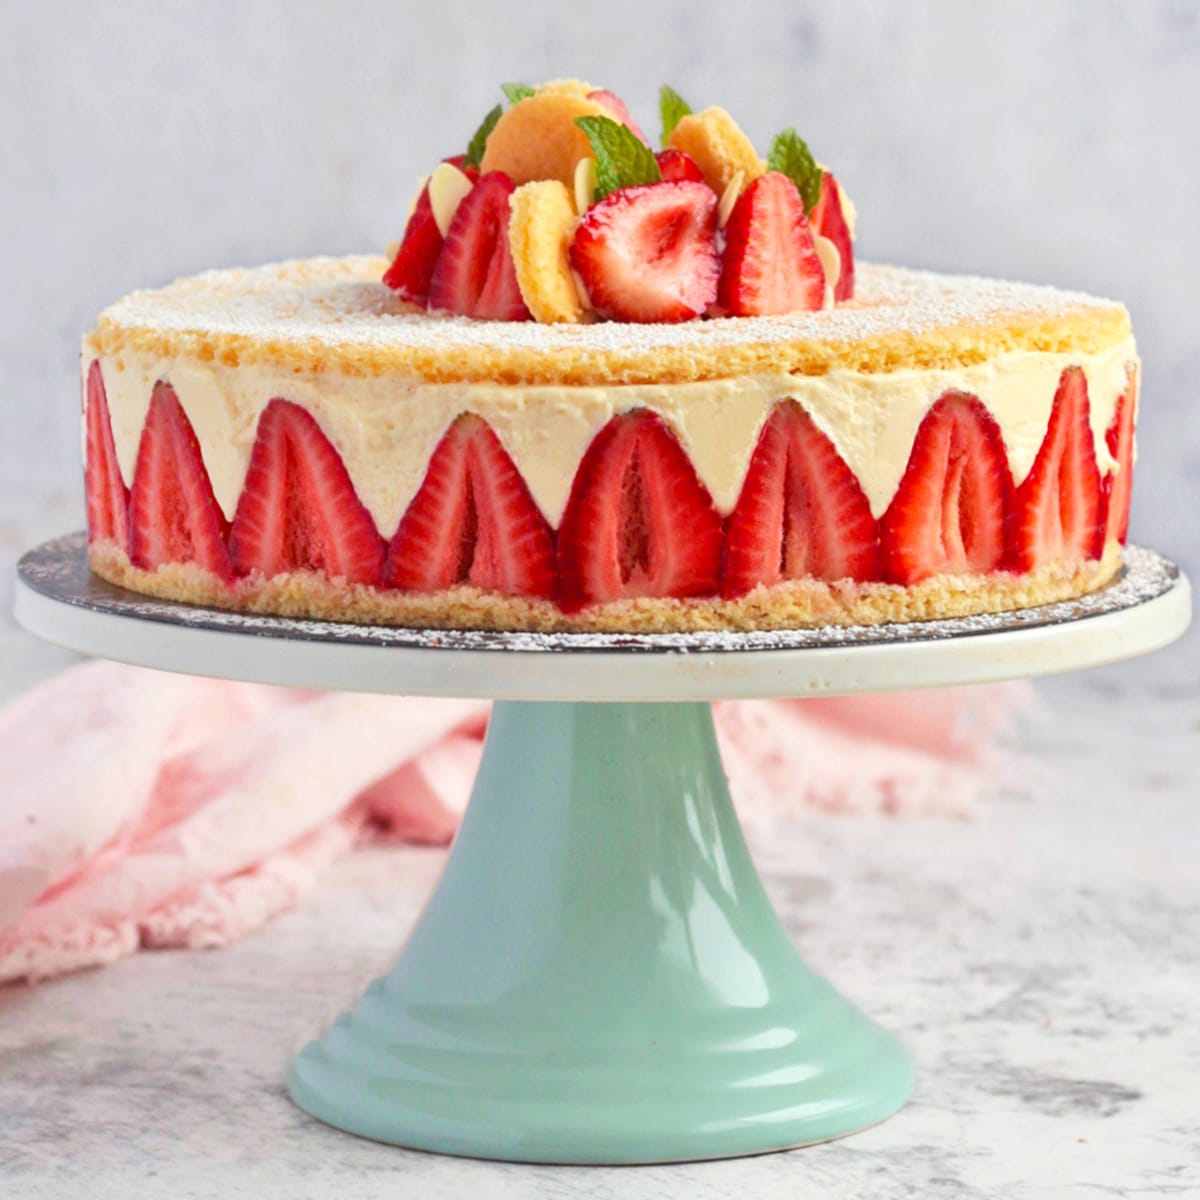 Fraisier Cake on a Green Cake Stand.